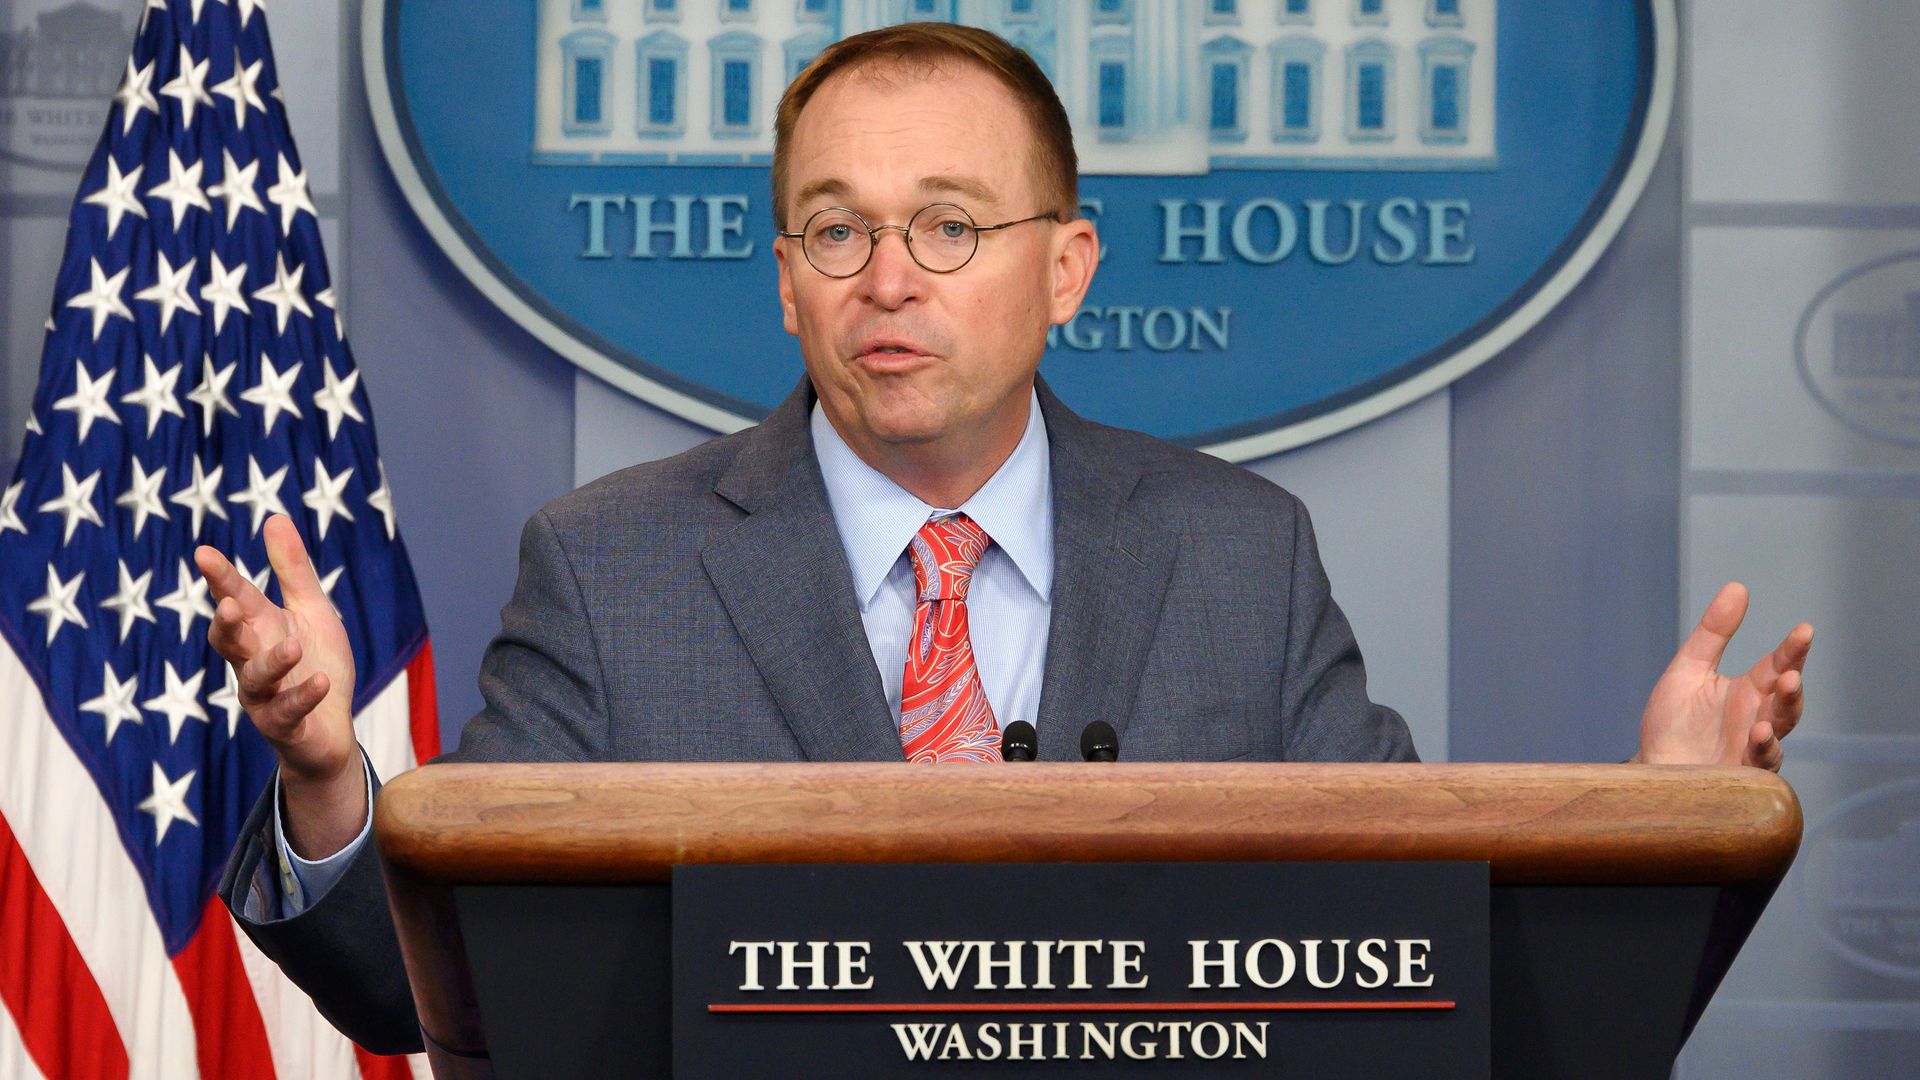 White House Acting Chief of Staff Mick Mulvaney speaks during a press briefing at the White House in Washington, DC, on October 17